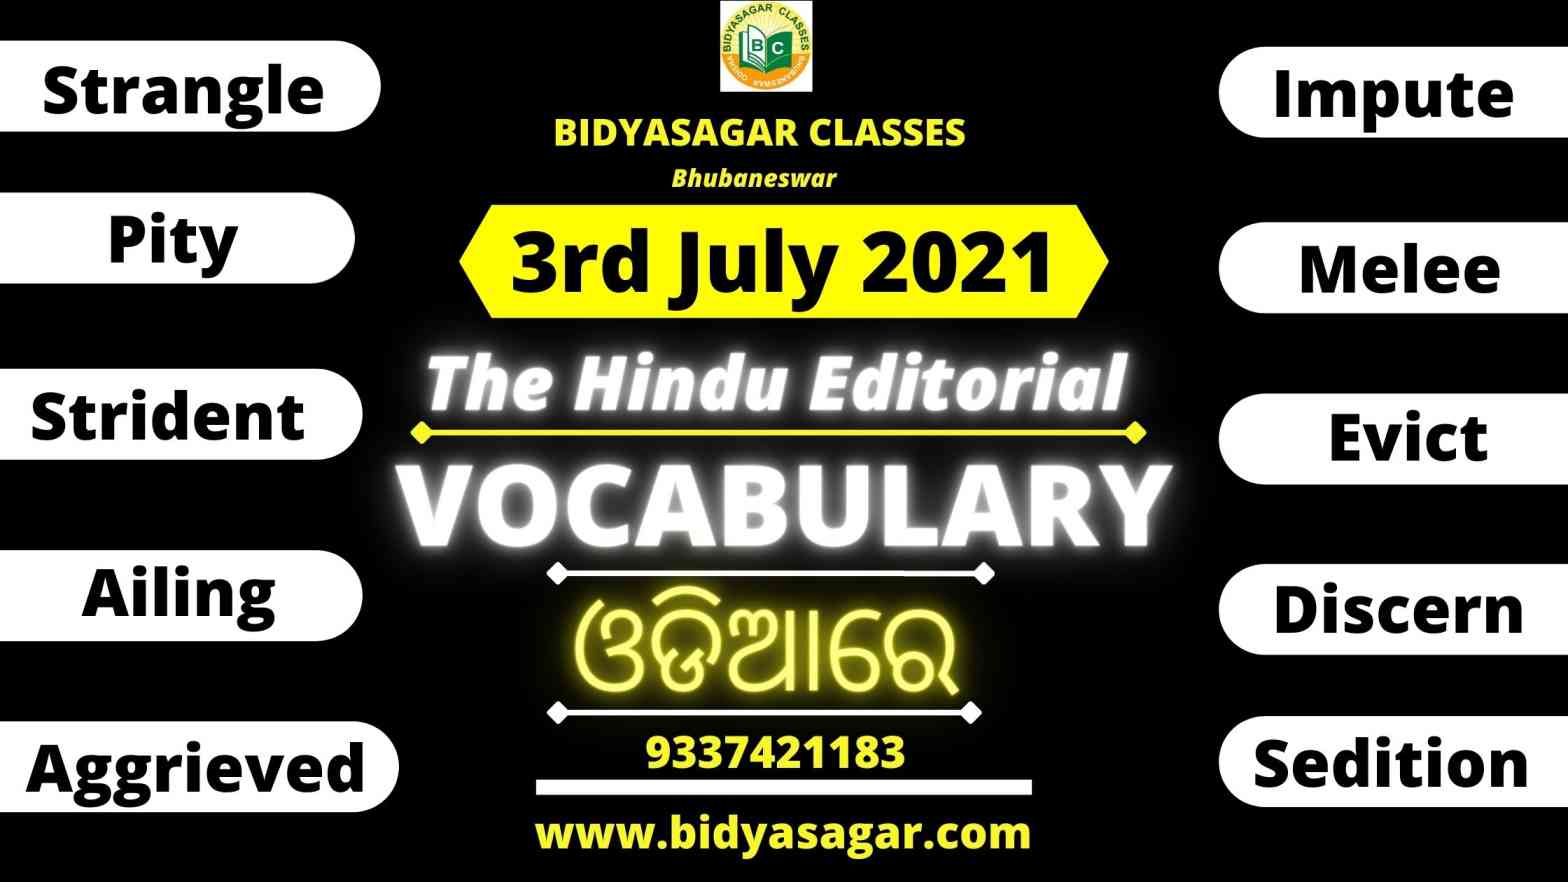 The Hindu Editorial Vocabulary of 3rd July 2021